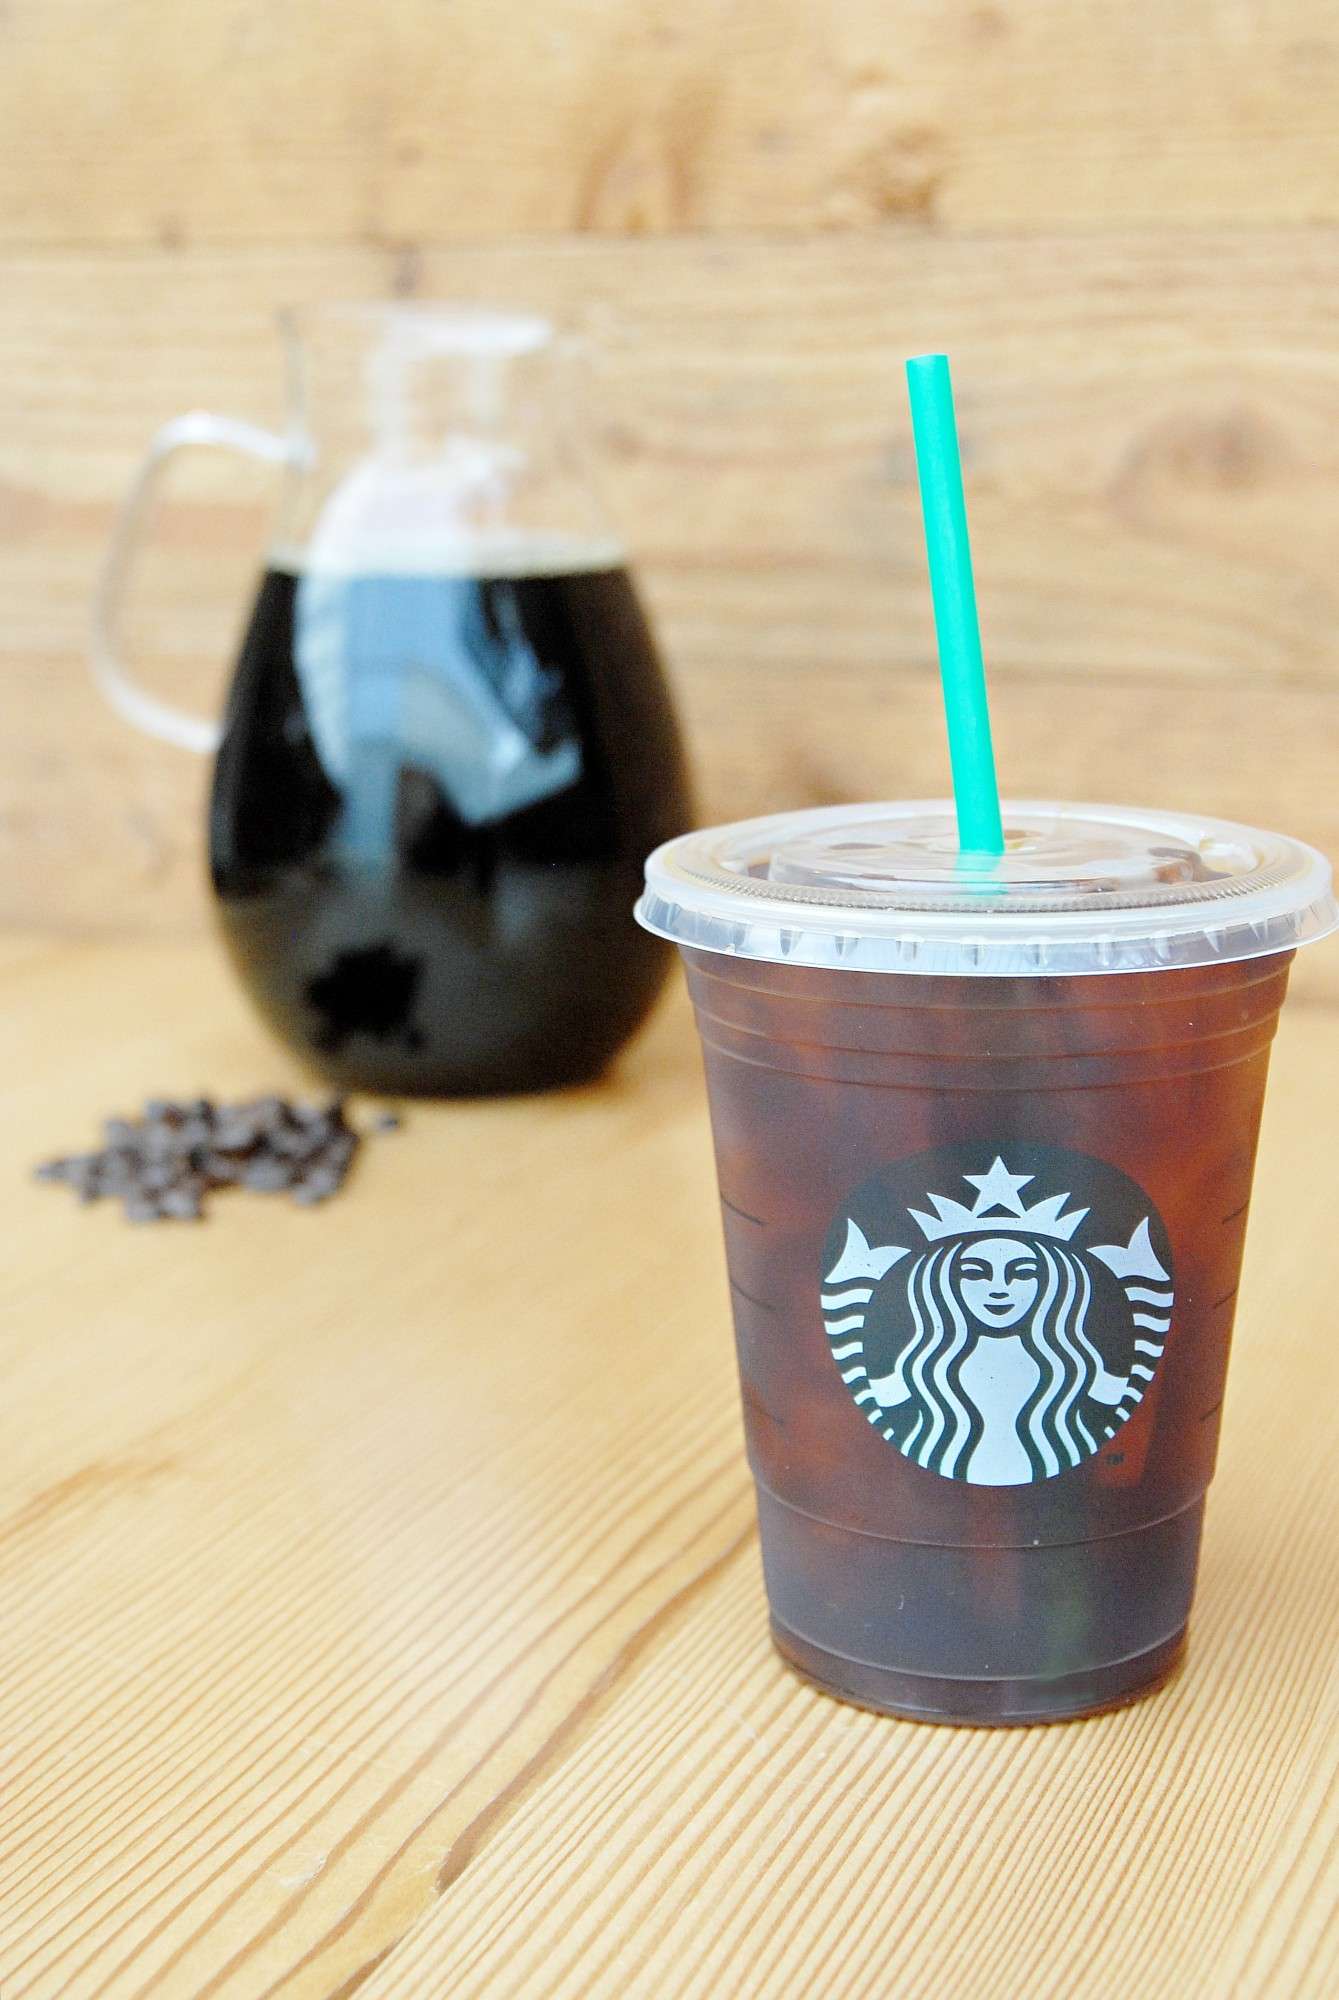 Starbucks Announces Cold Brew Coffee, Extra Water